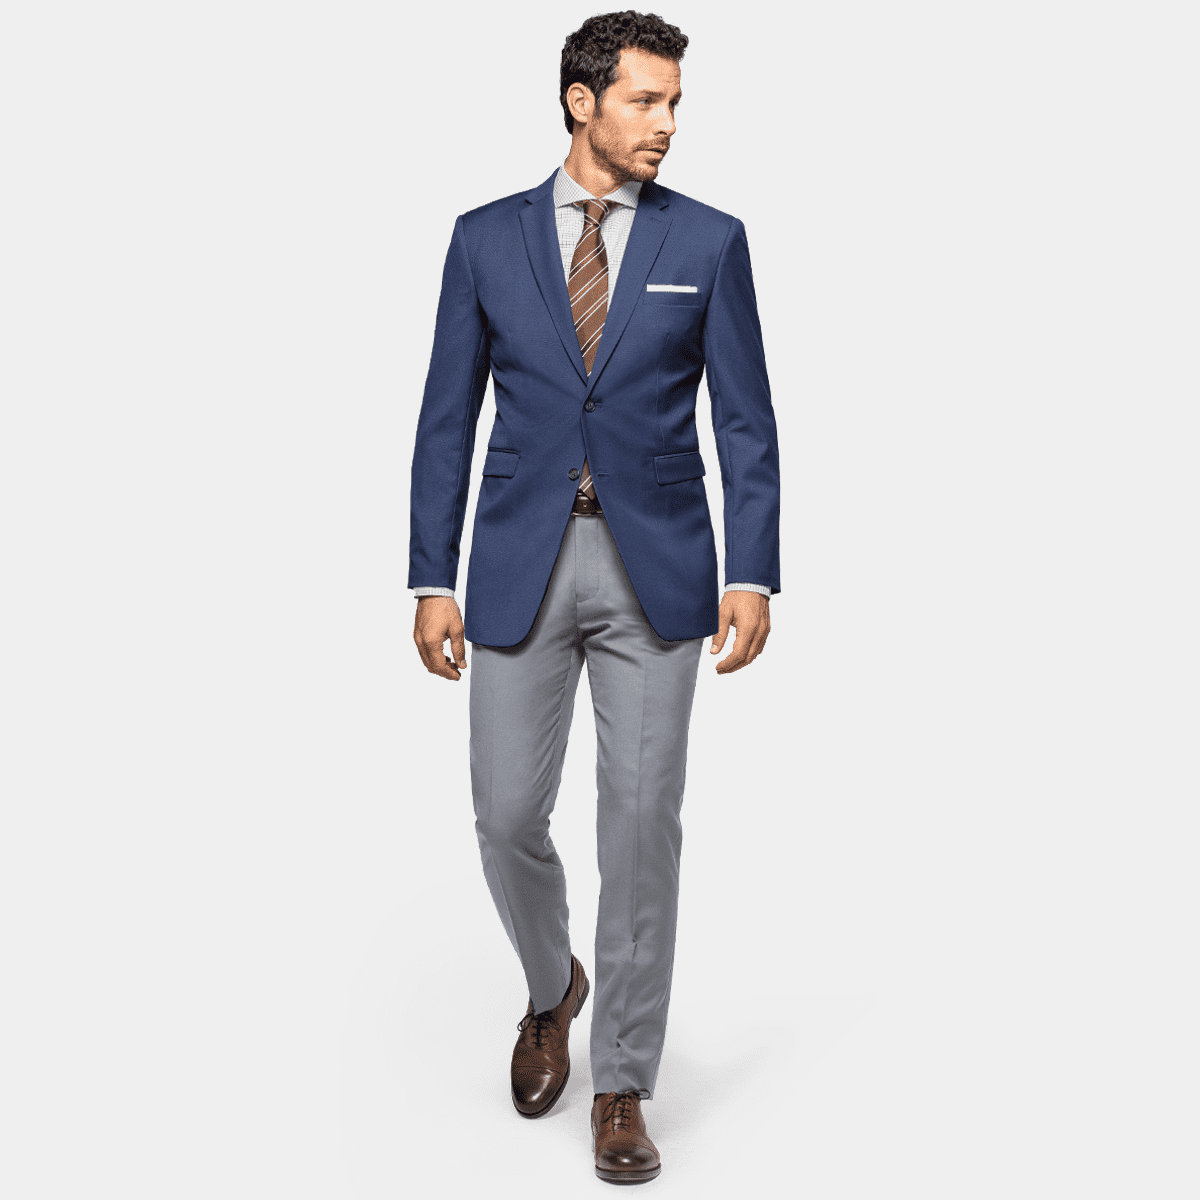 Broken suit: how to mix separates and color combinations